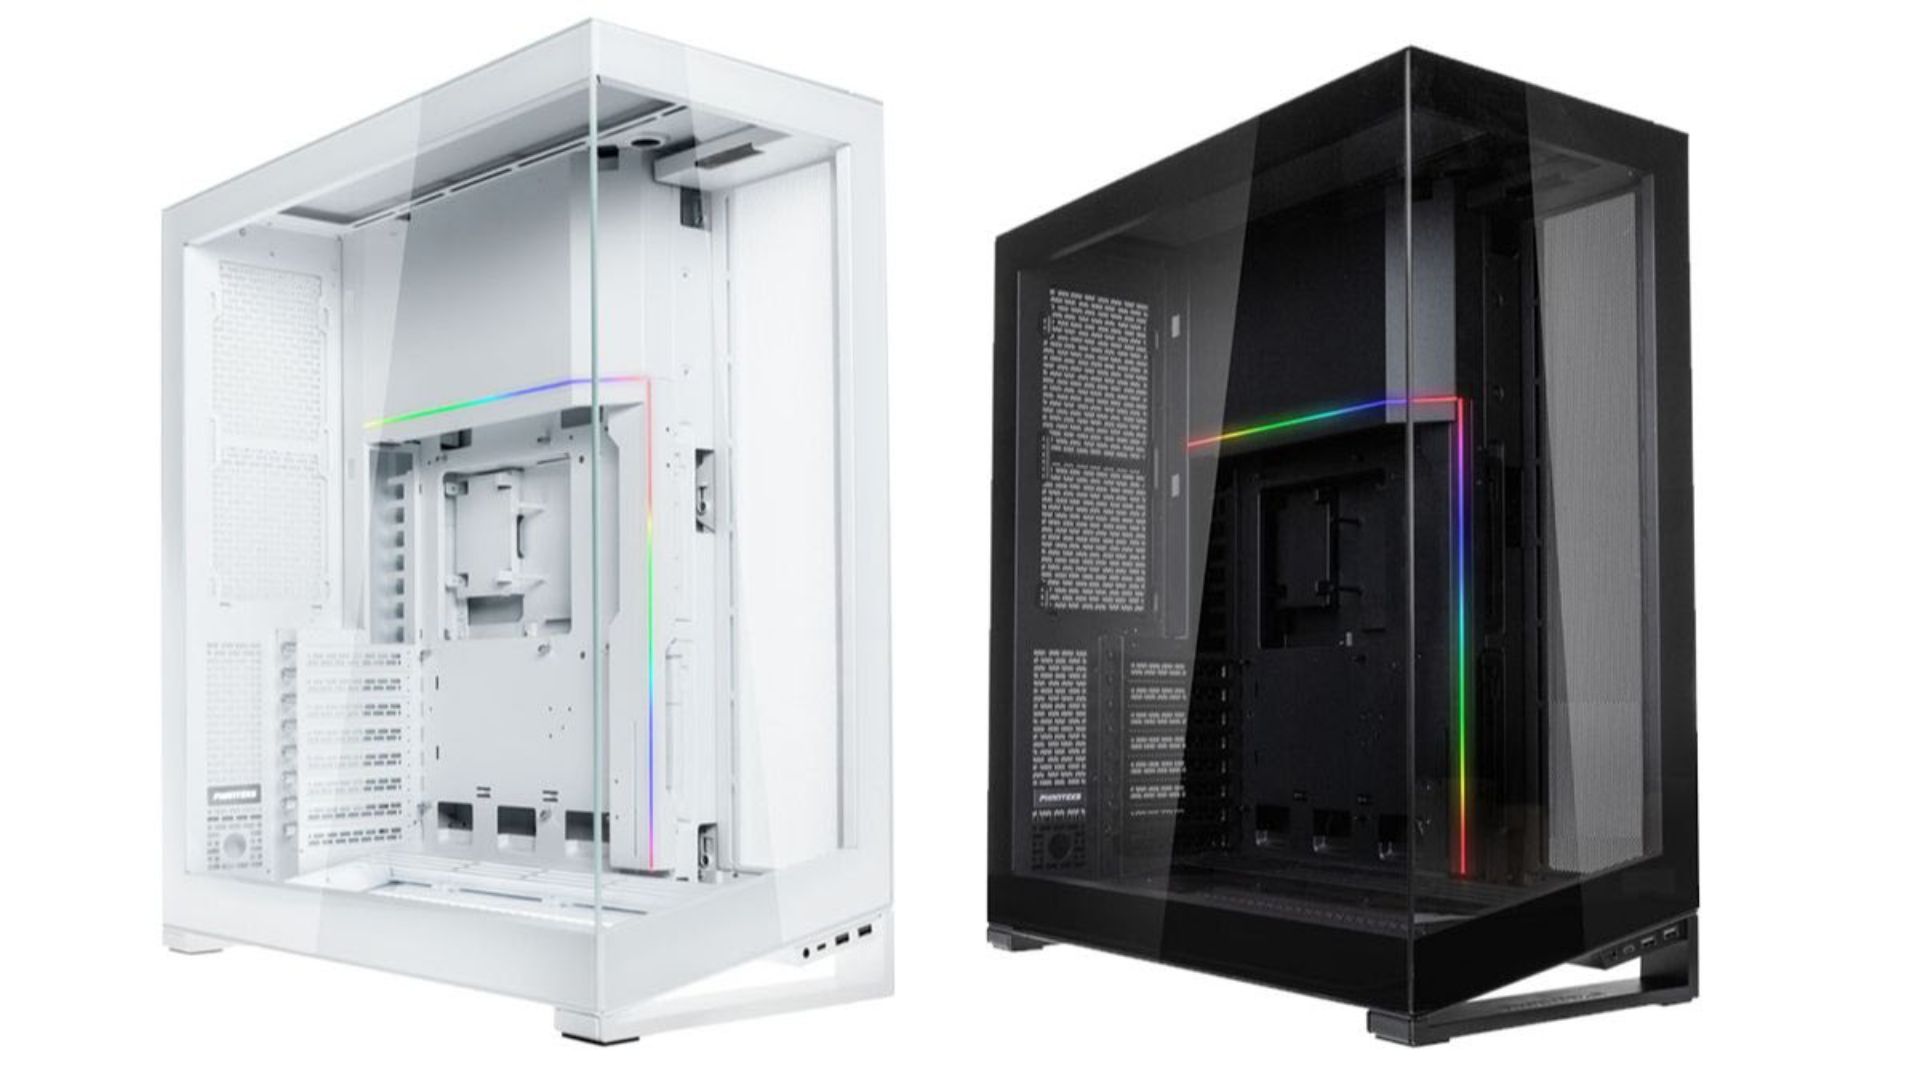 This computer case is TOO GOOD - Phanteks NV7 Case 